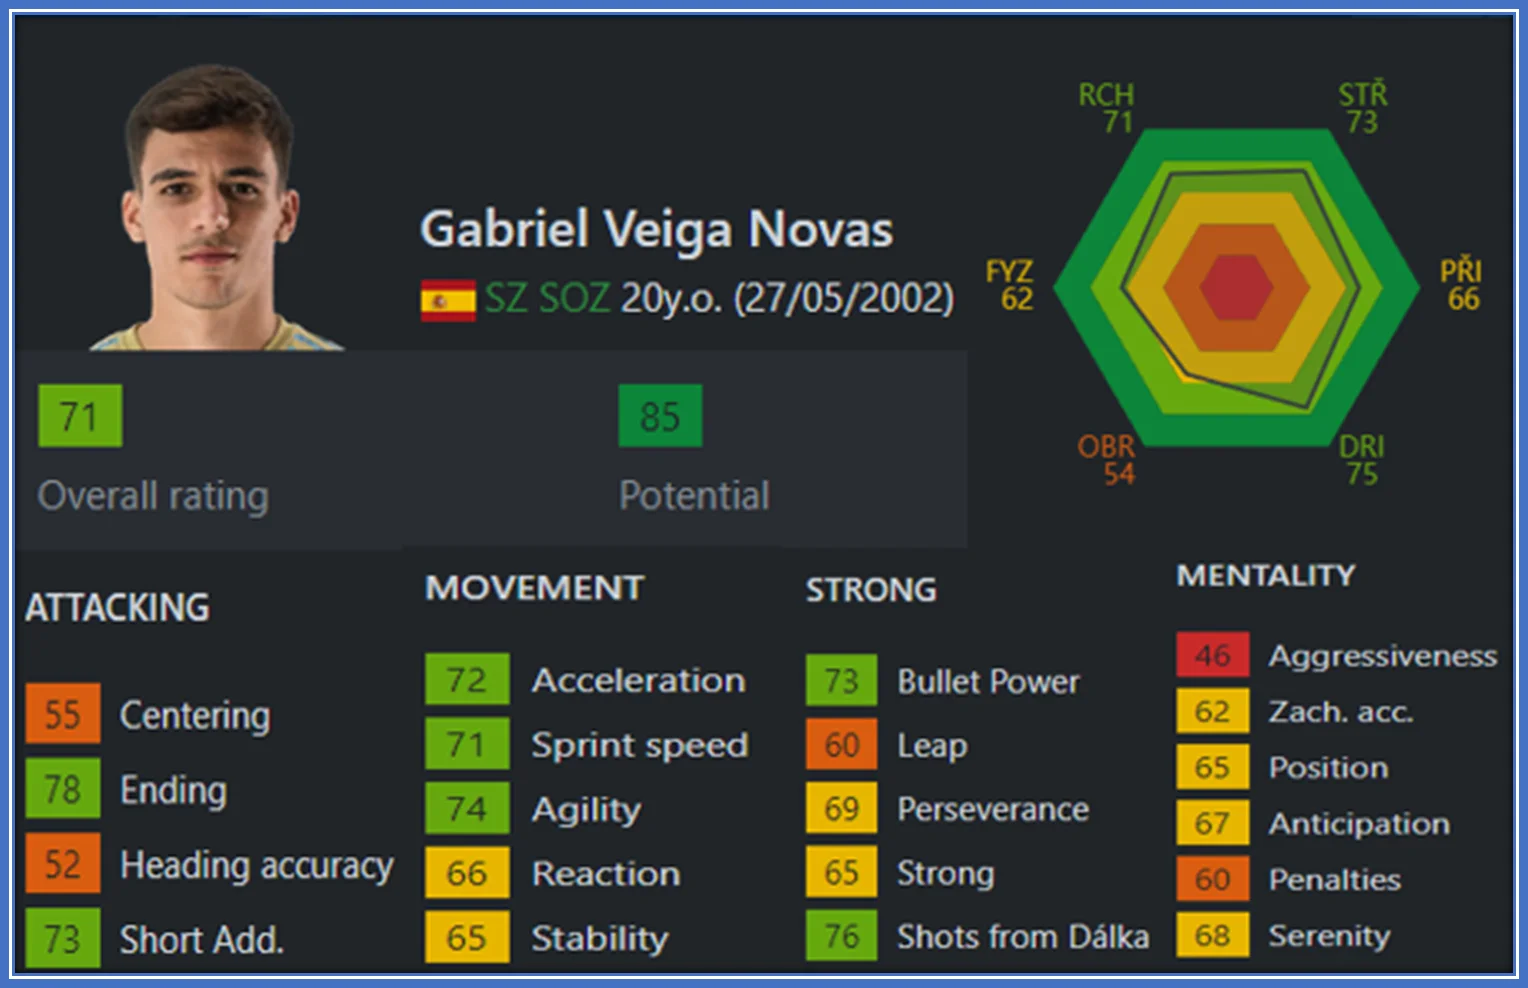 Gabri Veiga's 2023 Overall rating is 71, potentially increasing to 85 in the future.